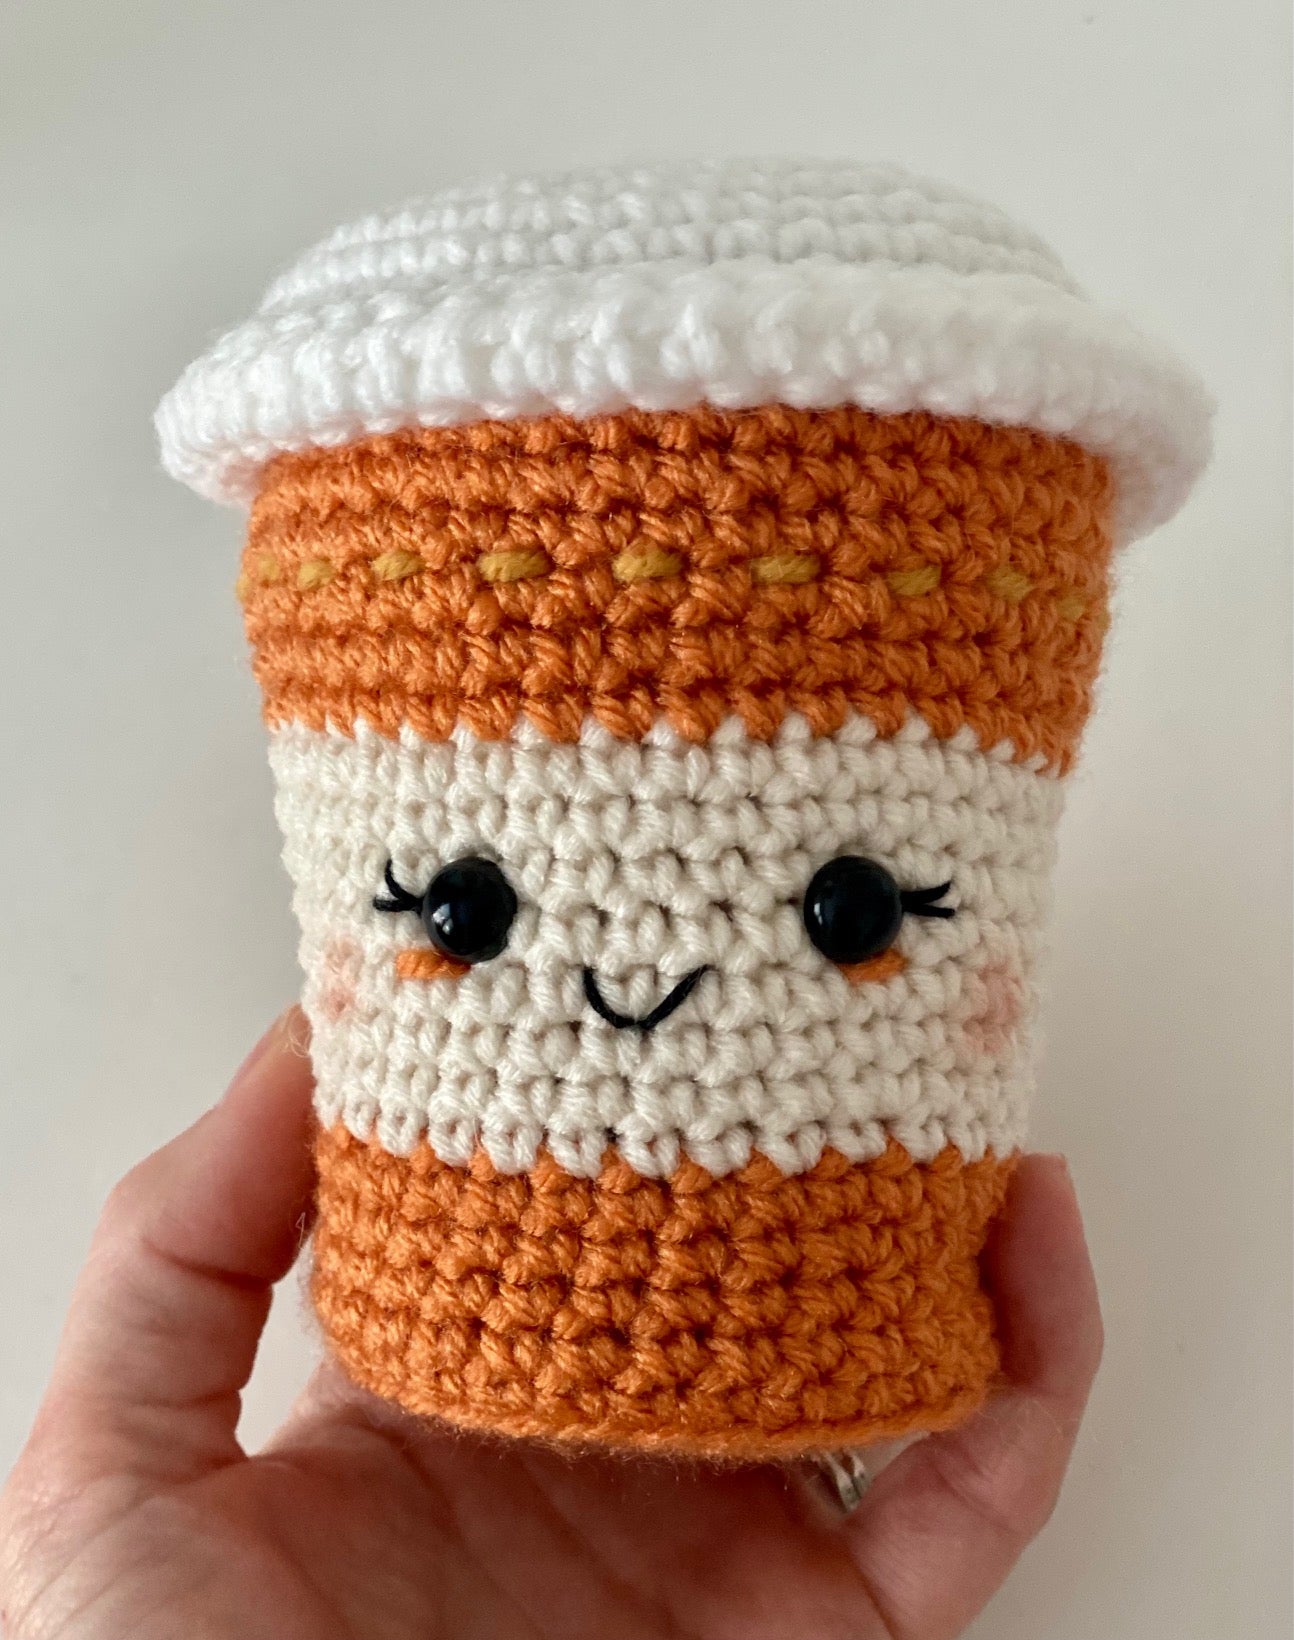 Crochet cafe review 